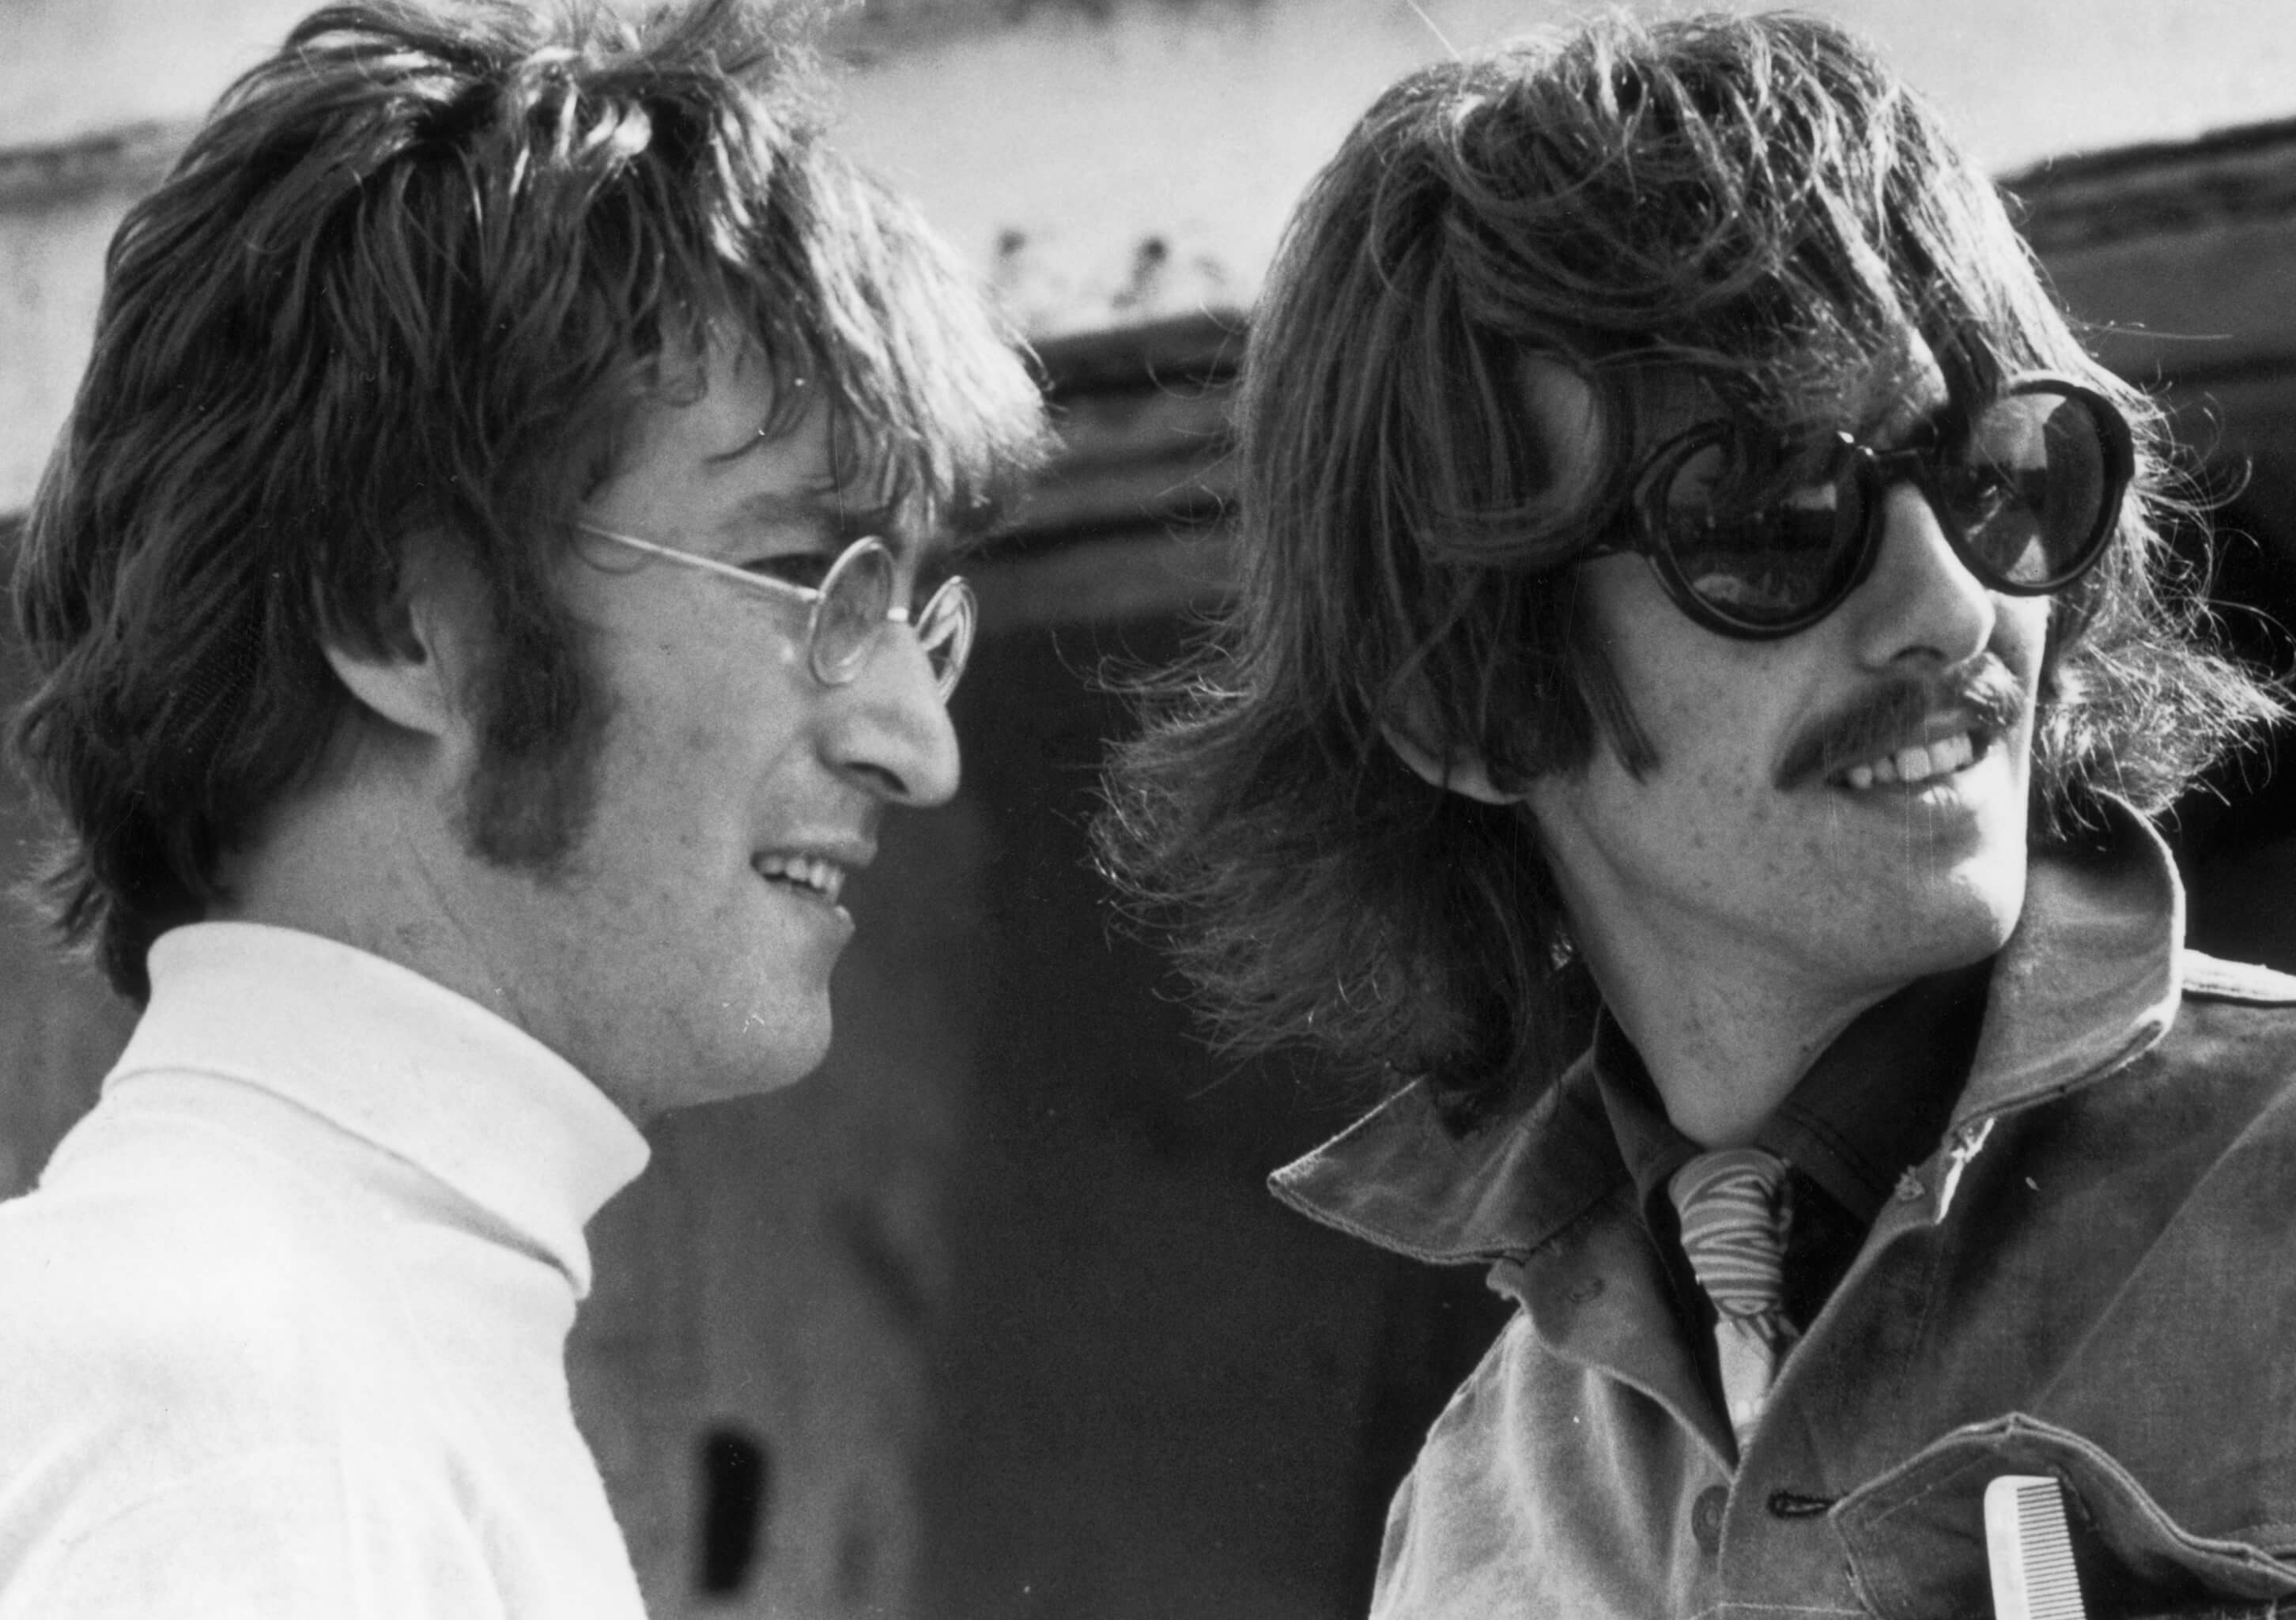 "Give Peace a Chance" singer John Lennon with George Harrison in black-and-white